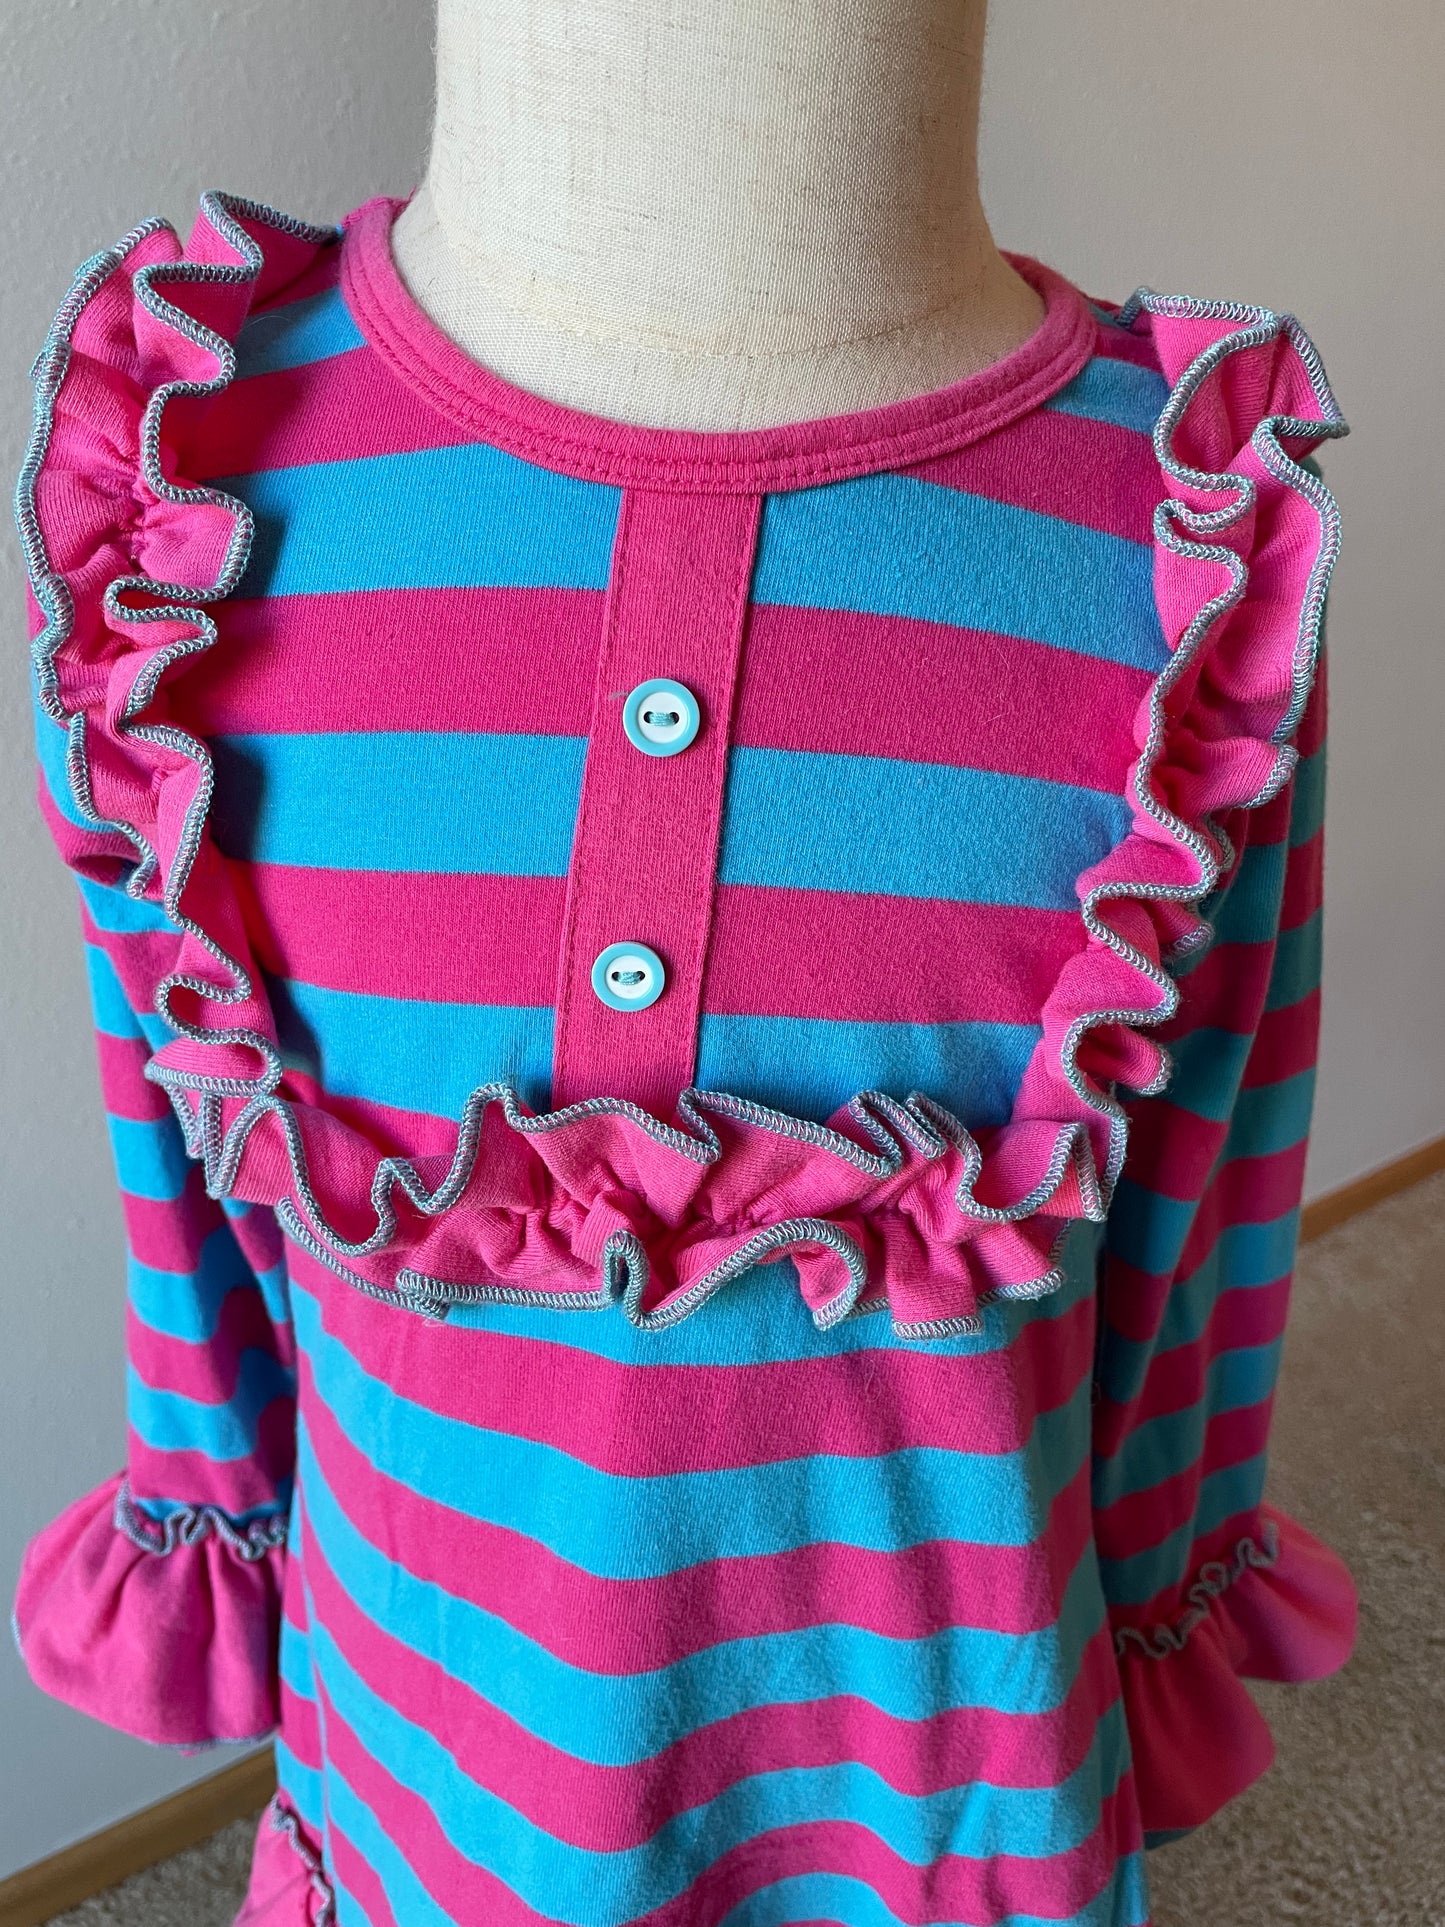 Tutu and Lulu Striped Top and Legging Set (4-5Y)